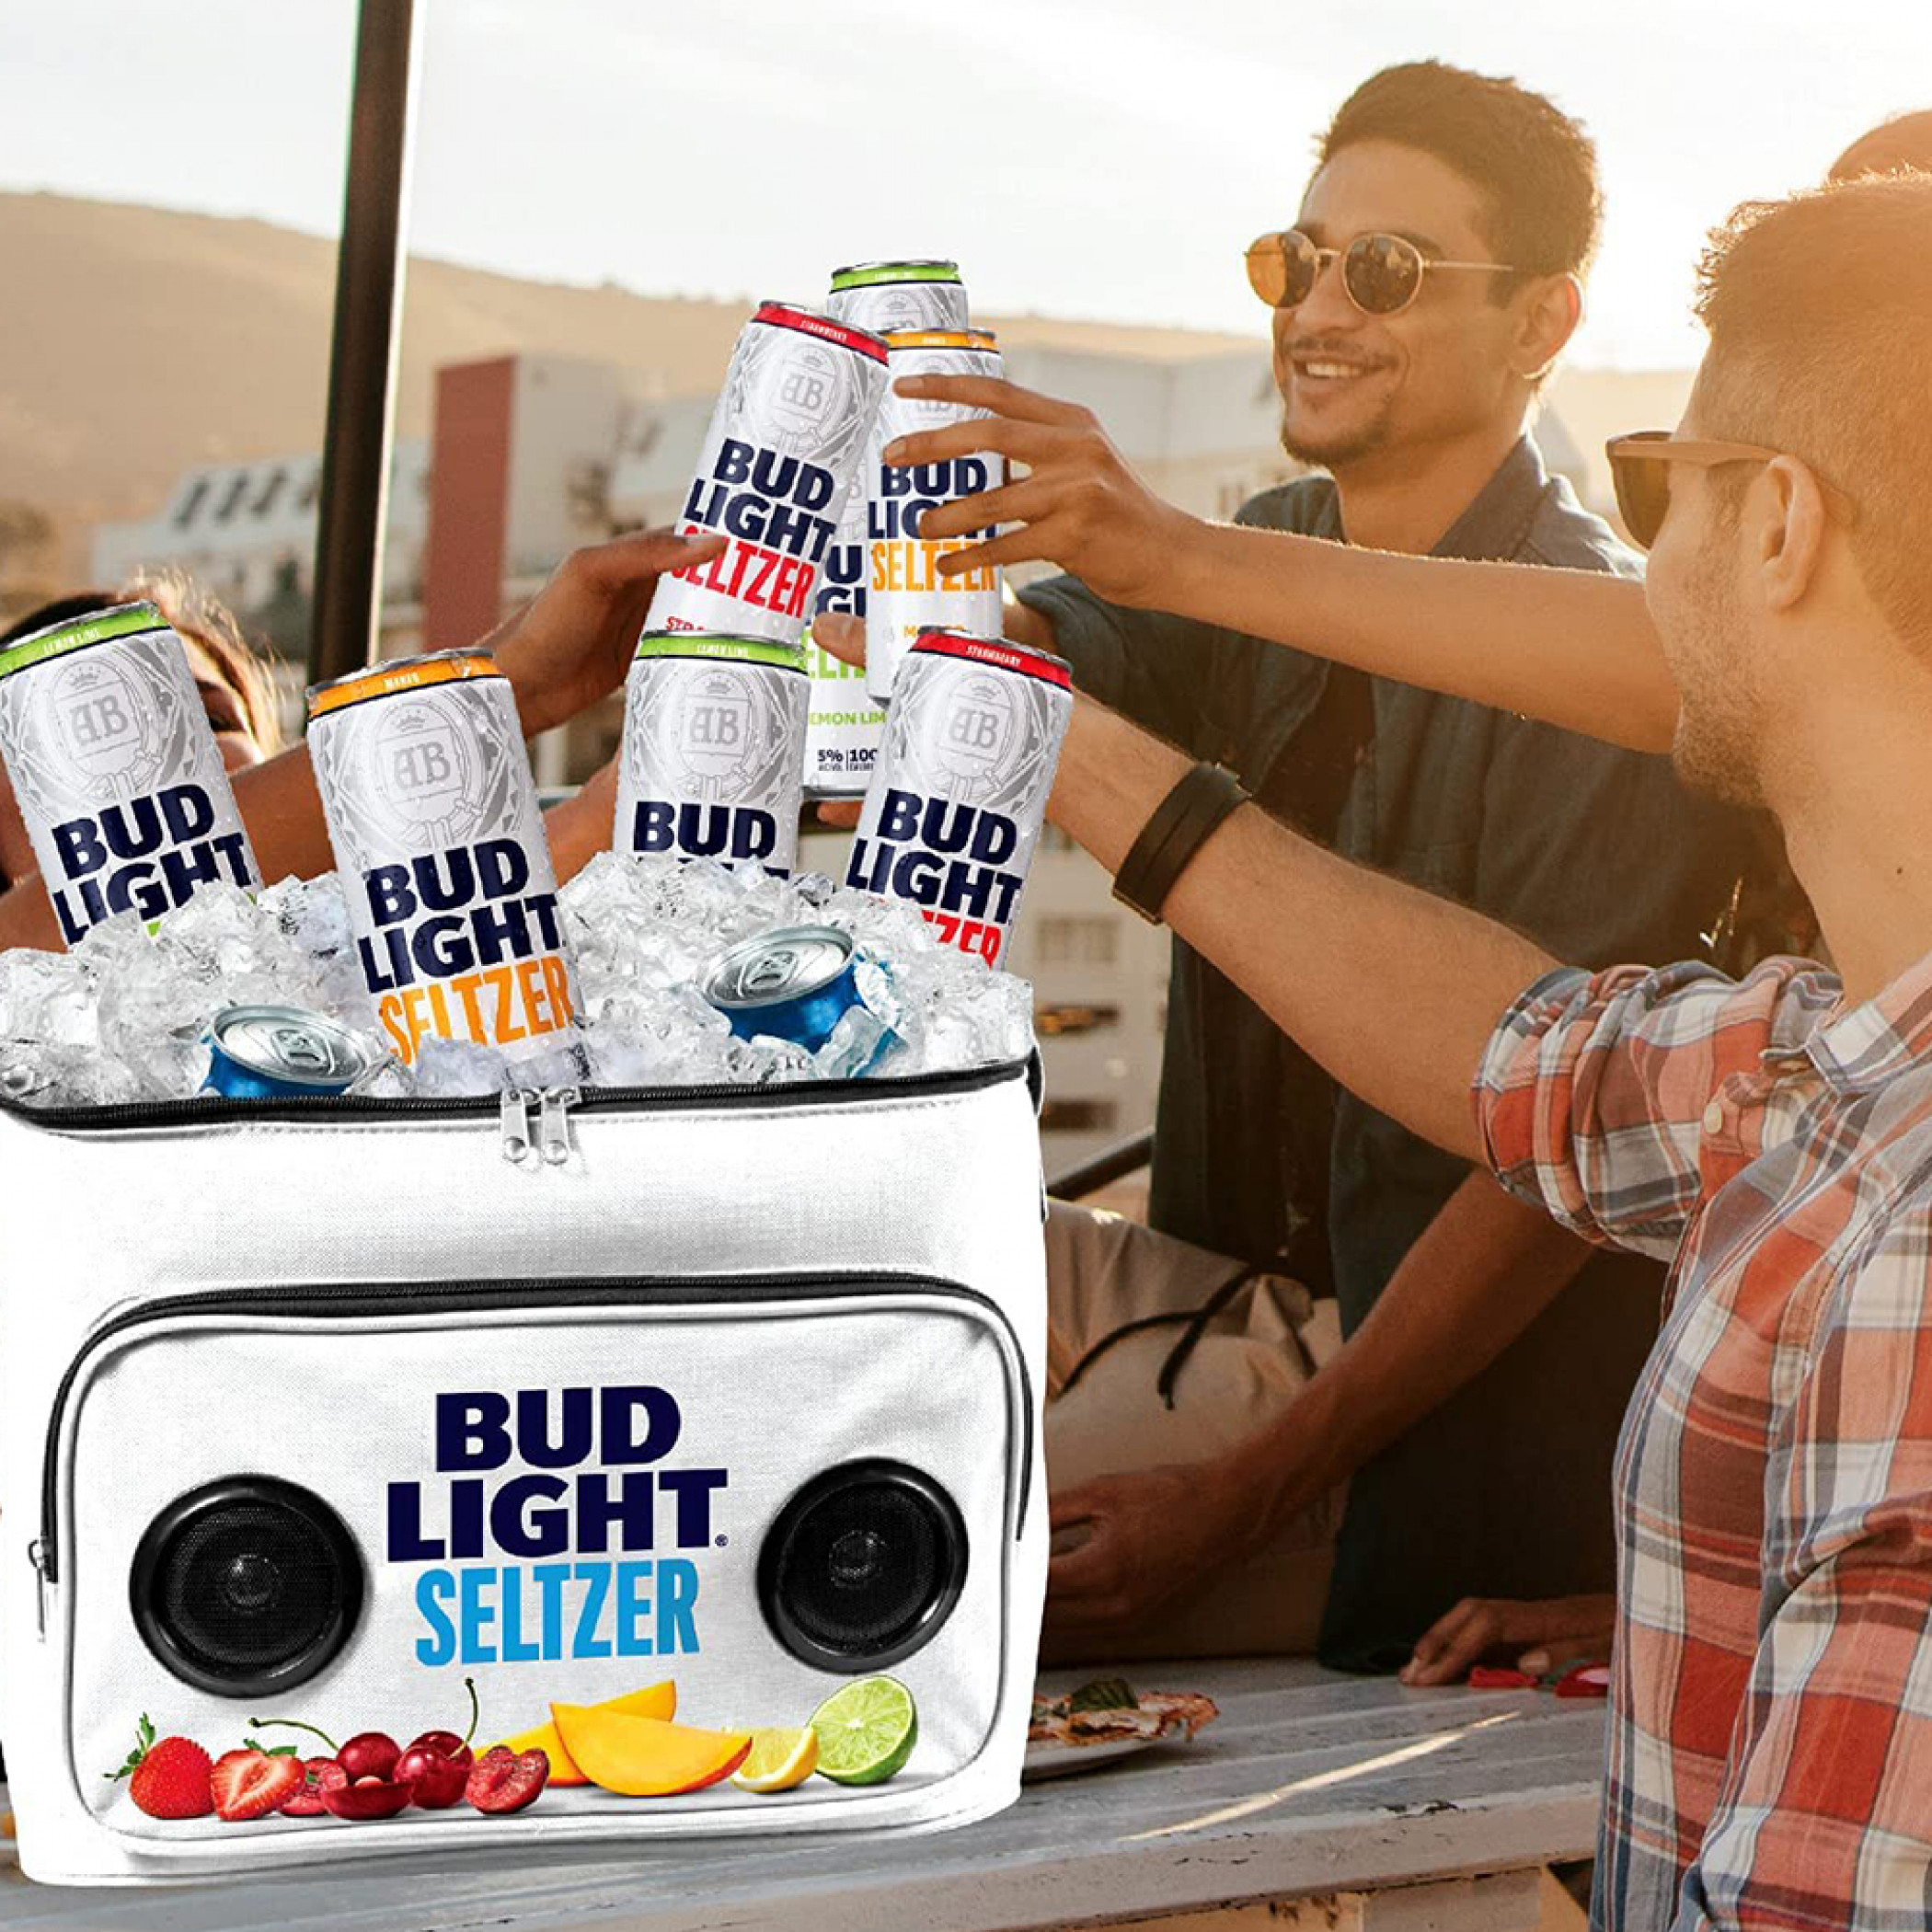 https://mmv2api.s3.us-east-2.amazonaws.com/products/images/Bud%20Light%20Seltzer%20Soft%20Cooler%20Bag%20with%20Built-in%20Rechargeable%20Wireless%20Bluetooth%20Speakers%20Foldable%20and%20Portable%20Durable%20and%20Material%20Compatible%20for%20Smartphones,%20Tablets%20&%20MP3%20Players-2.jpg